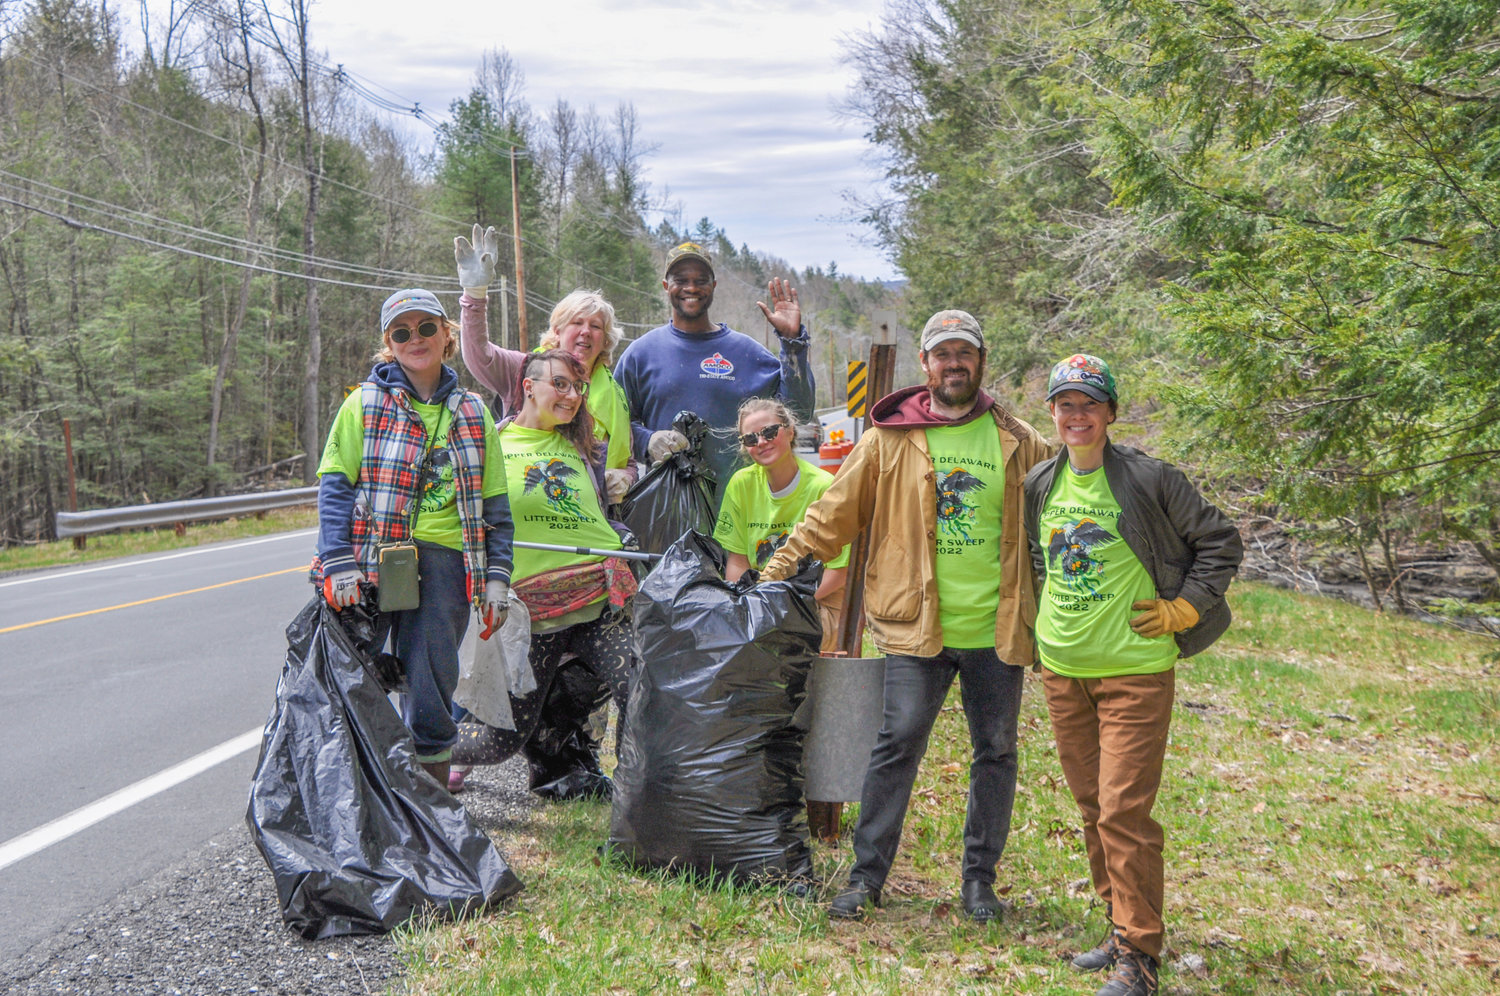 On my way to the Delaware River region litter sweep event last Saturday, I ran into this hard-working group of volunteers plucking trash off the road on Route 55 between Eldred and Barryville.